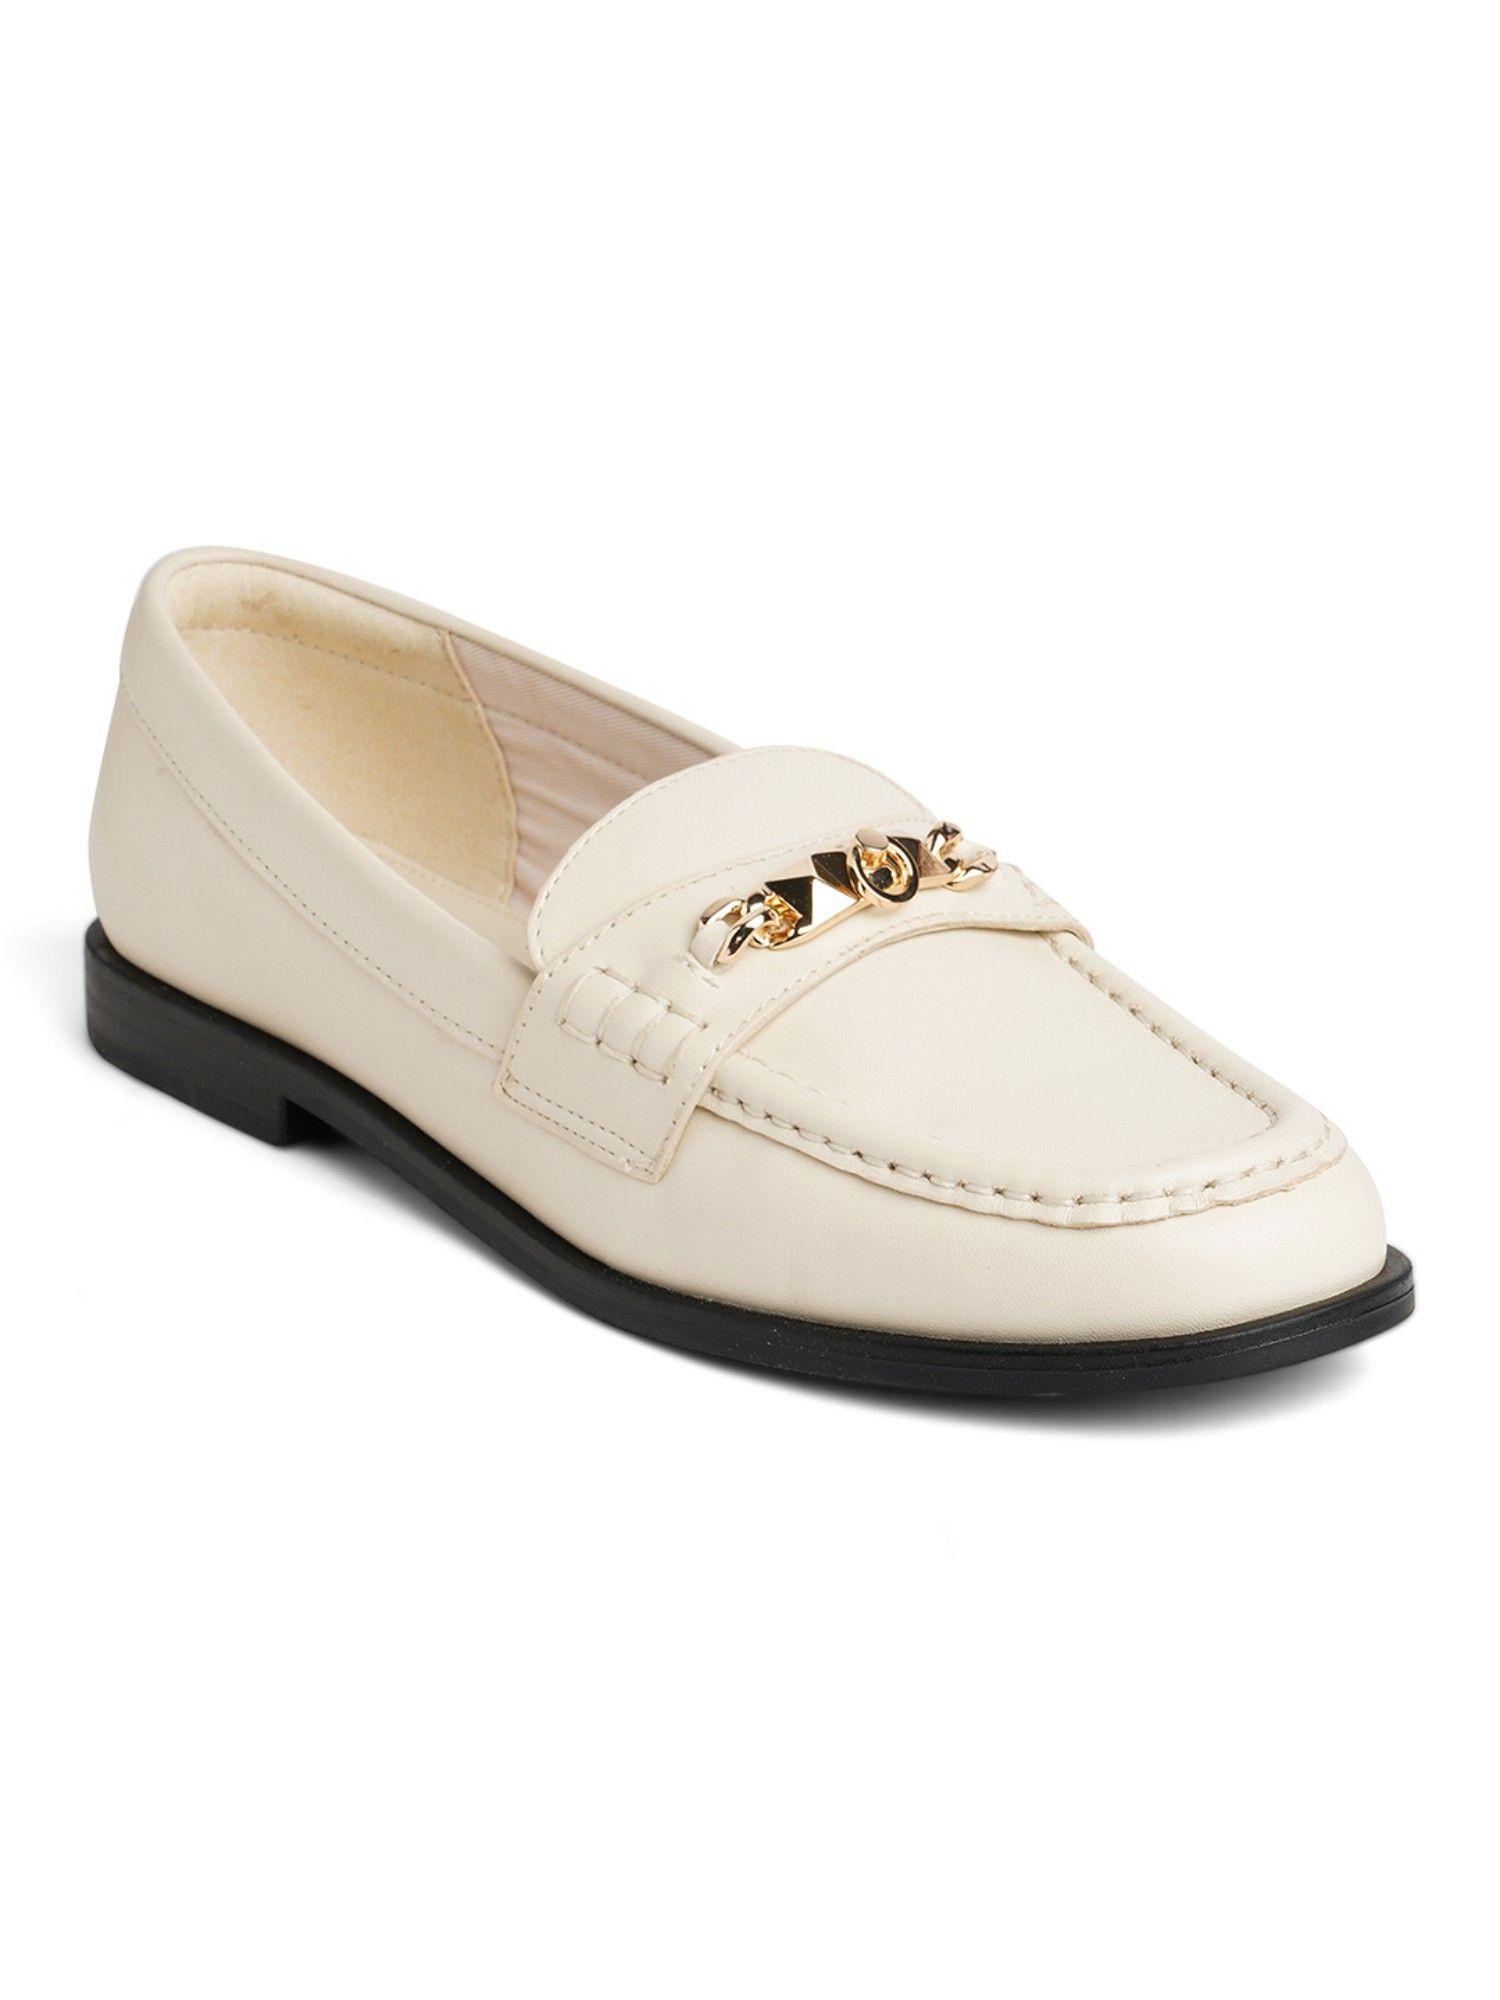 loafers white flats for women